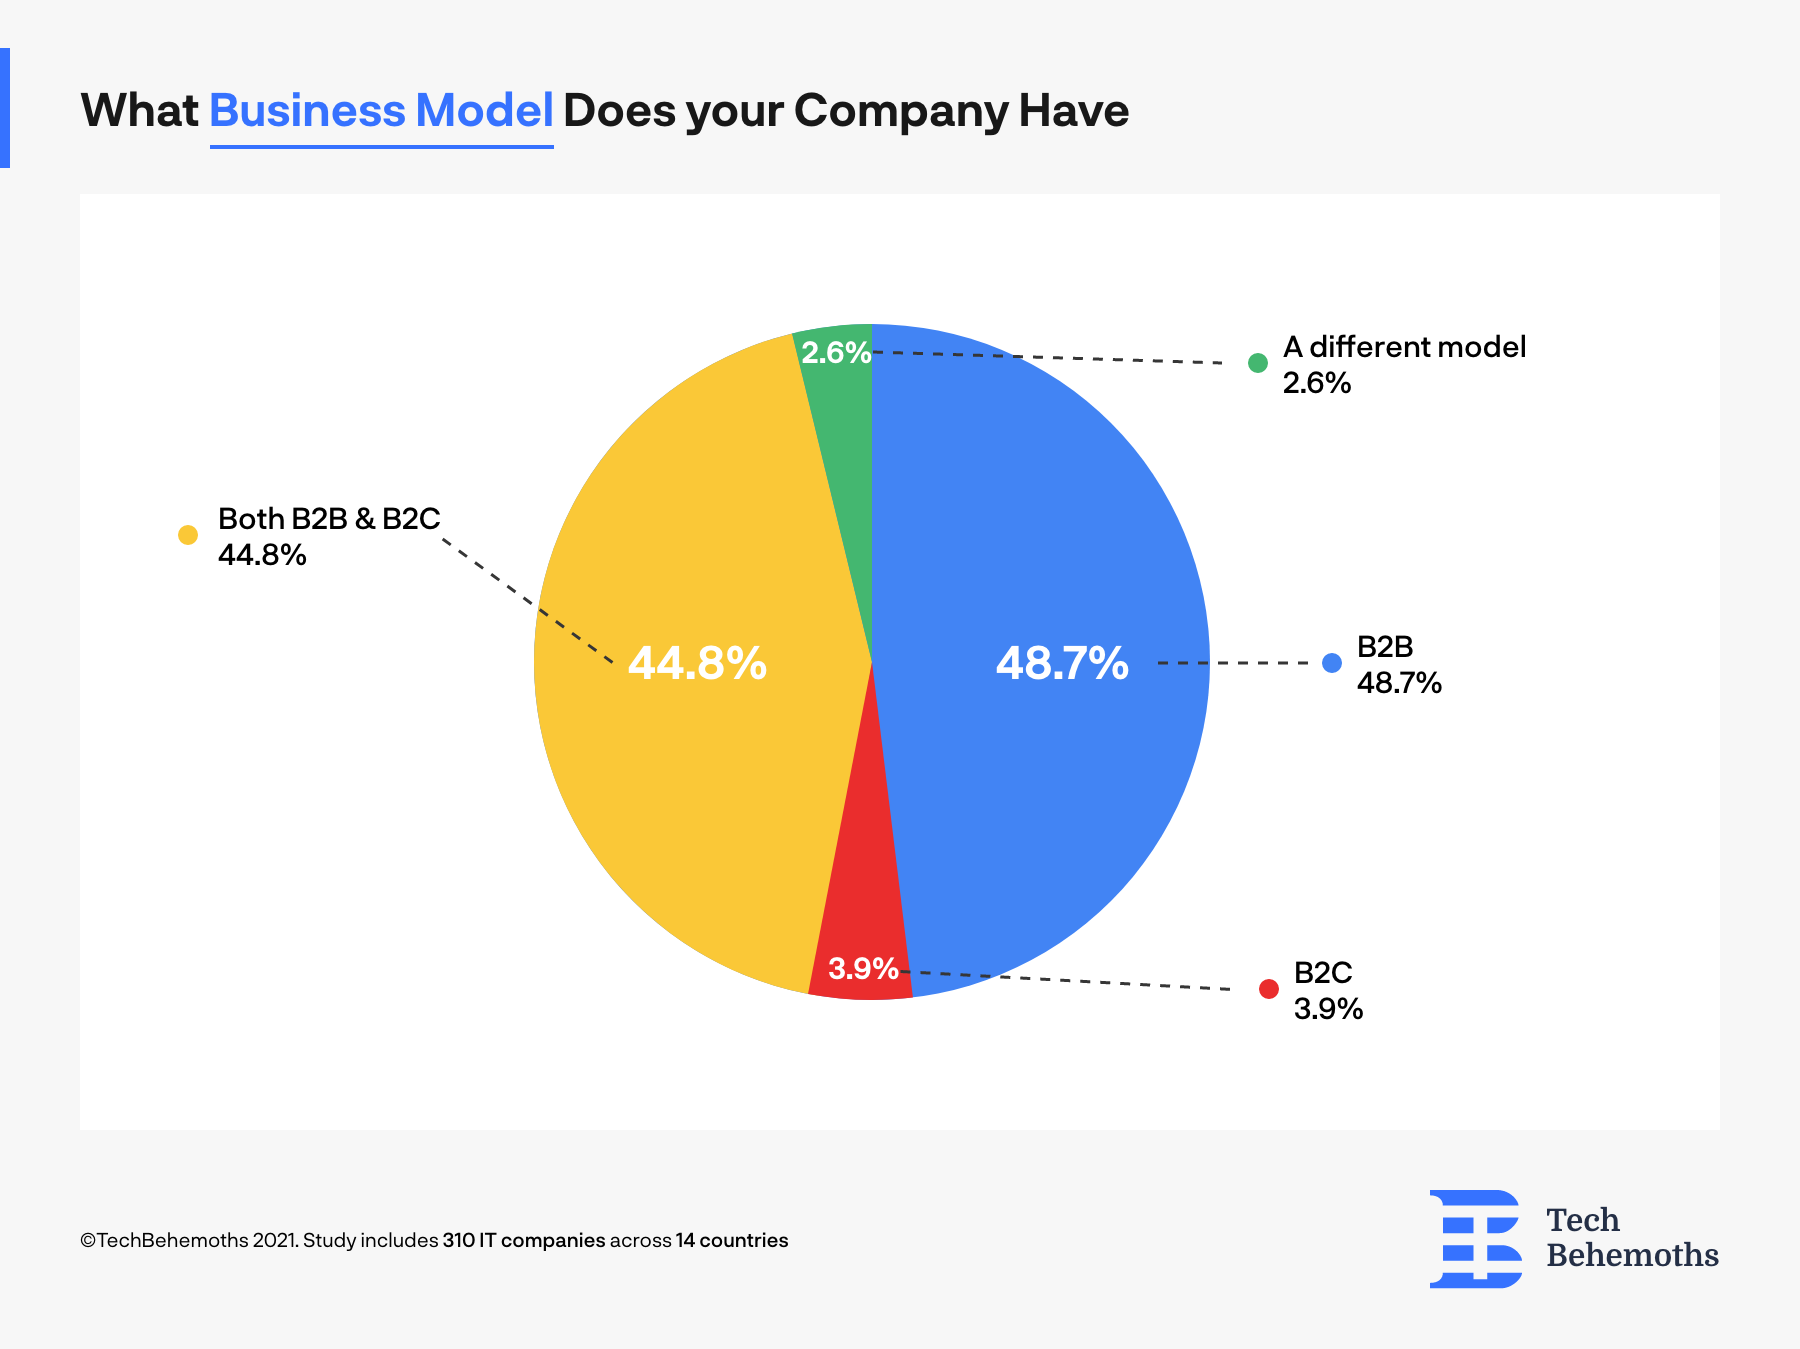 What Business model does respondent companies follow